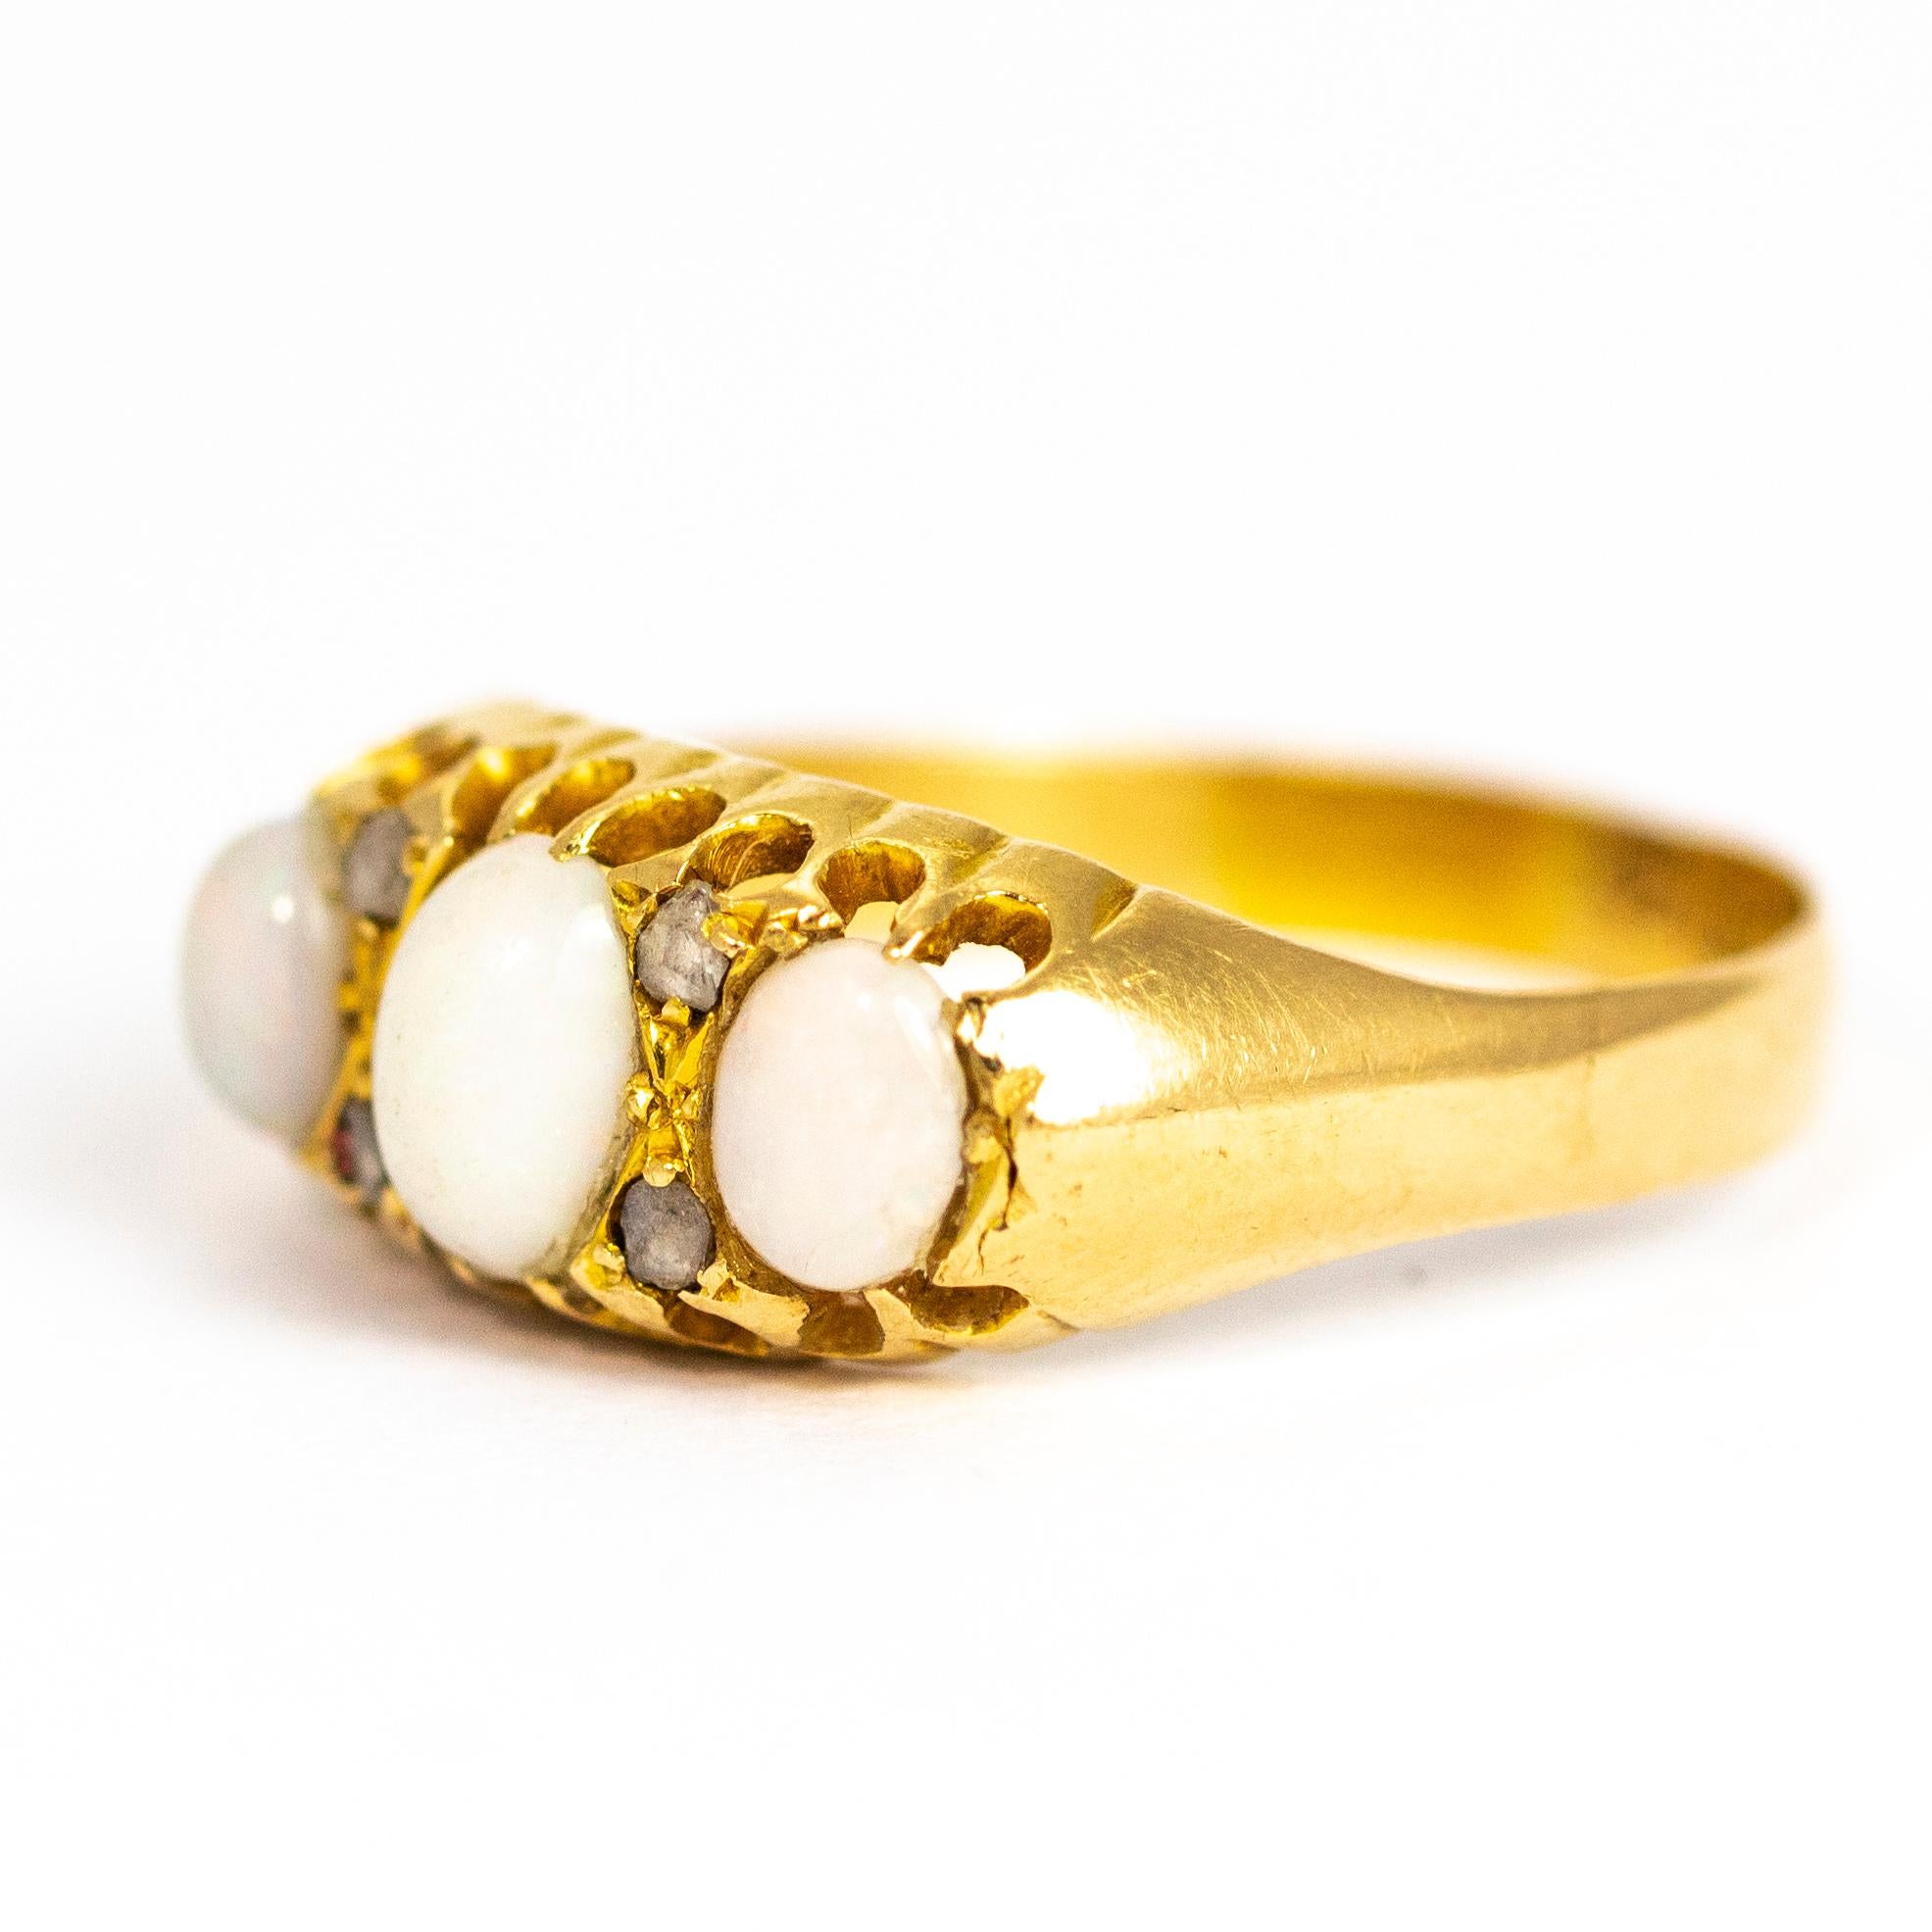 This charming ring holds three graduated oval opal stone and in-between them sit four rose cut diamonds. All set in a simple claw type setting with cross detail. Modelled in 18ct gold and made in Birmingham, England.

Ring Size: R 1/2 or 8 3/4